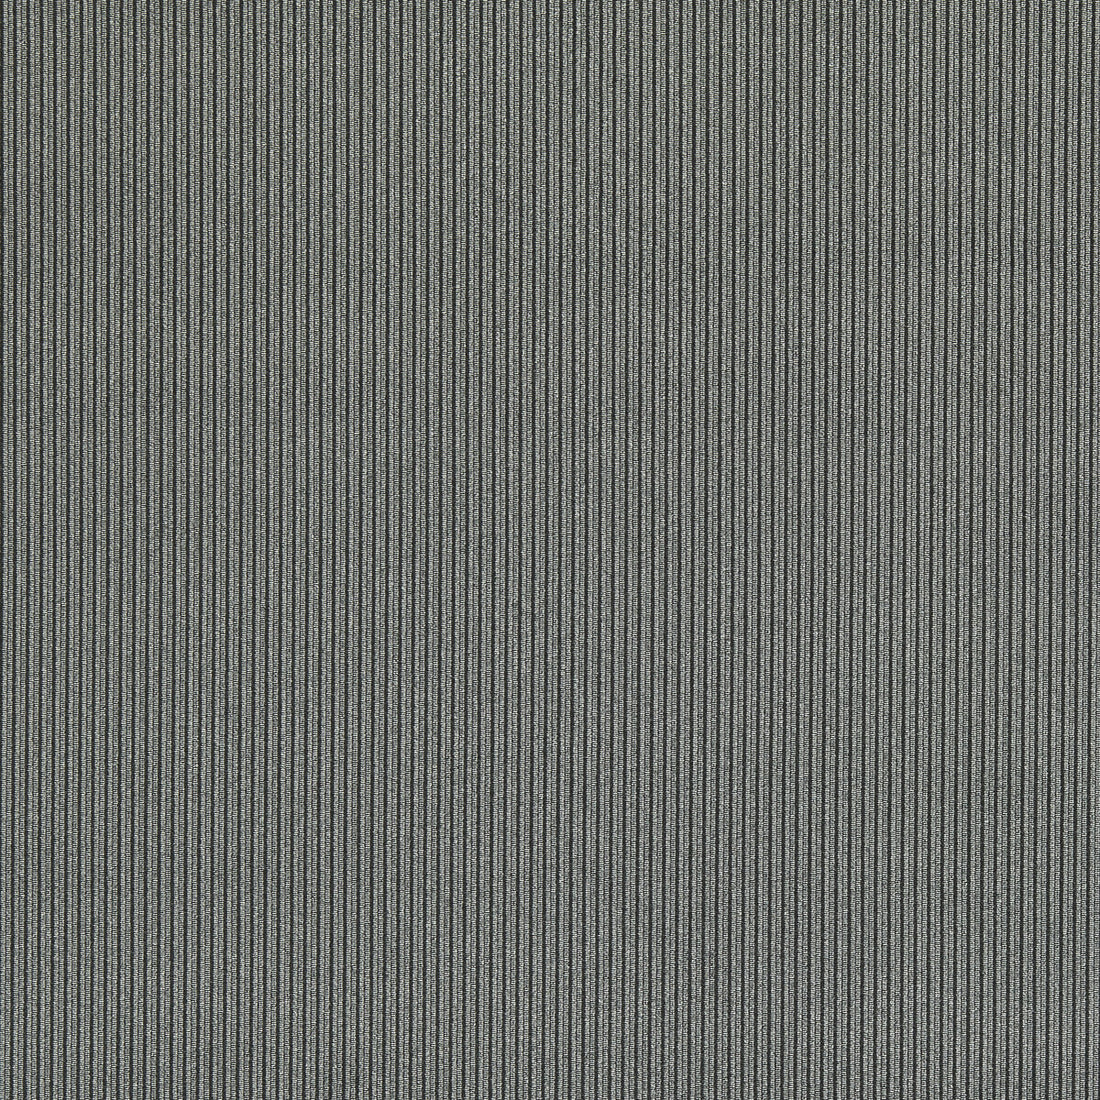 Ashdown fabric in ebony color - pattern F1688/03.CAC.0 - by Clarke And Clarke in the Whitworth collection